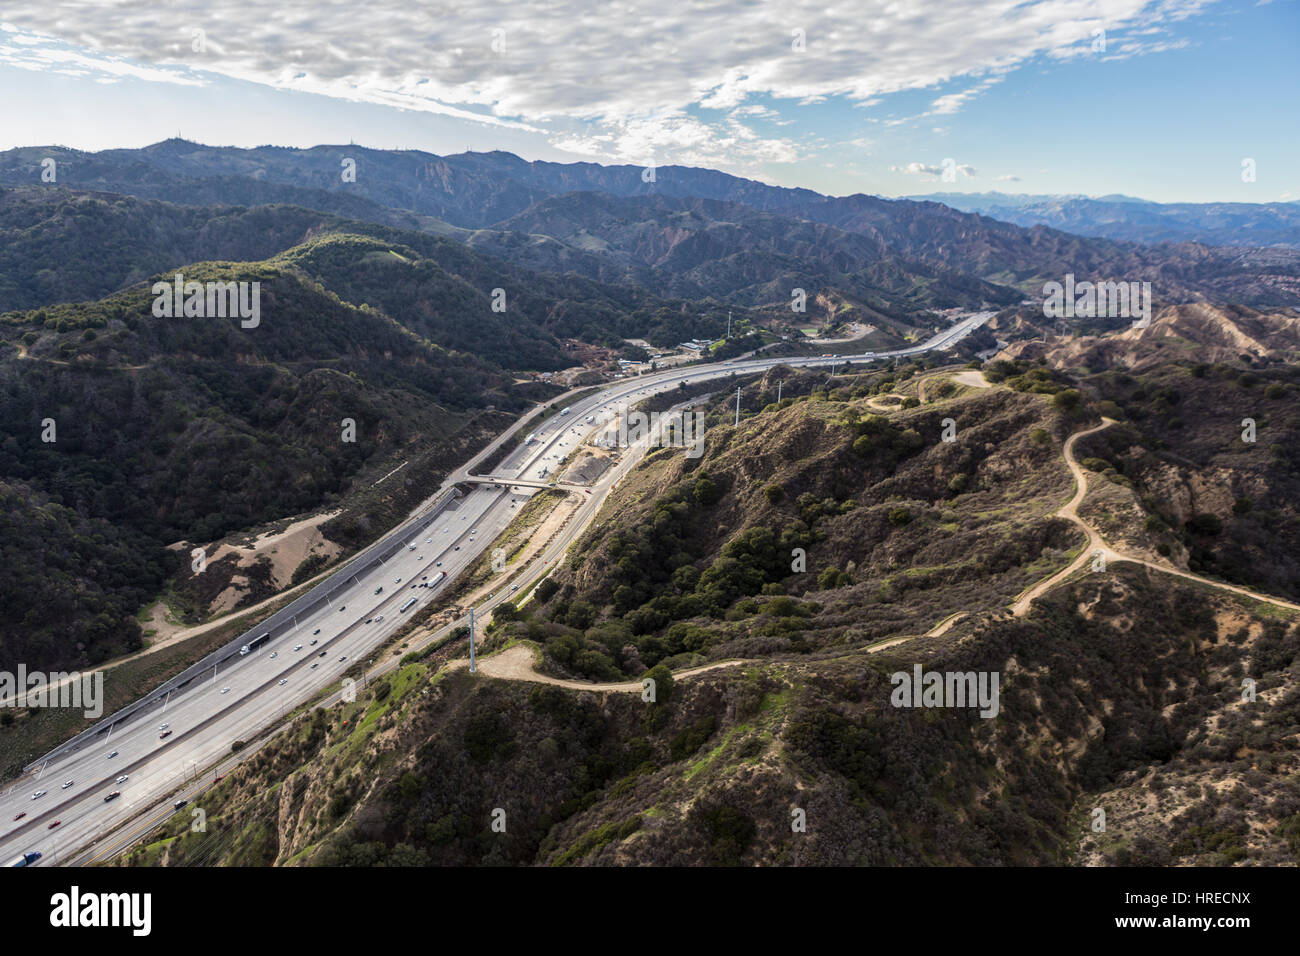 Aerial view of the Golden State 5 Freeway in the Newhall Pass in Los Angeles County, California. Stock Photo